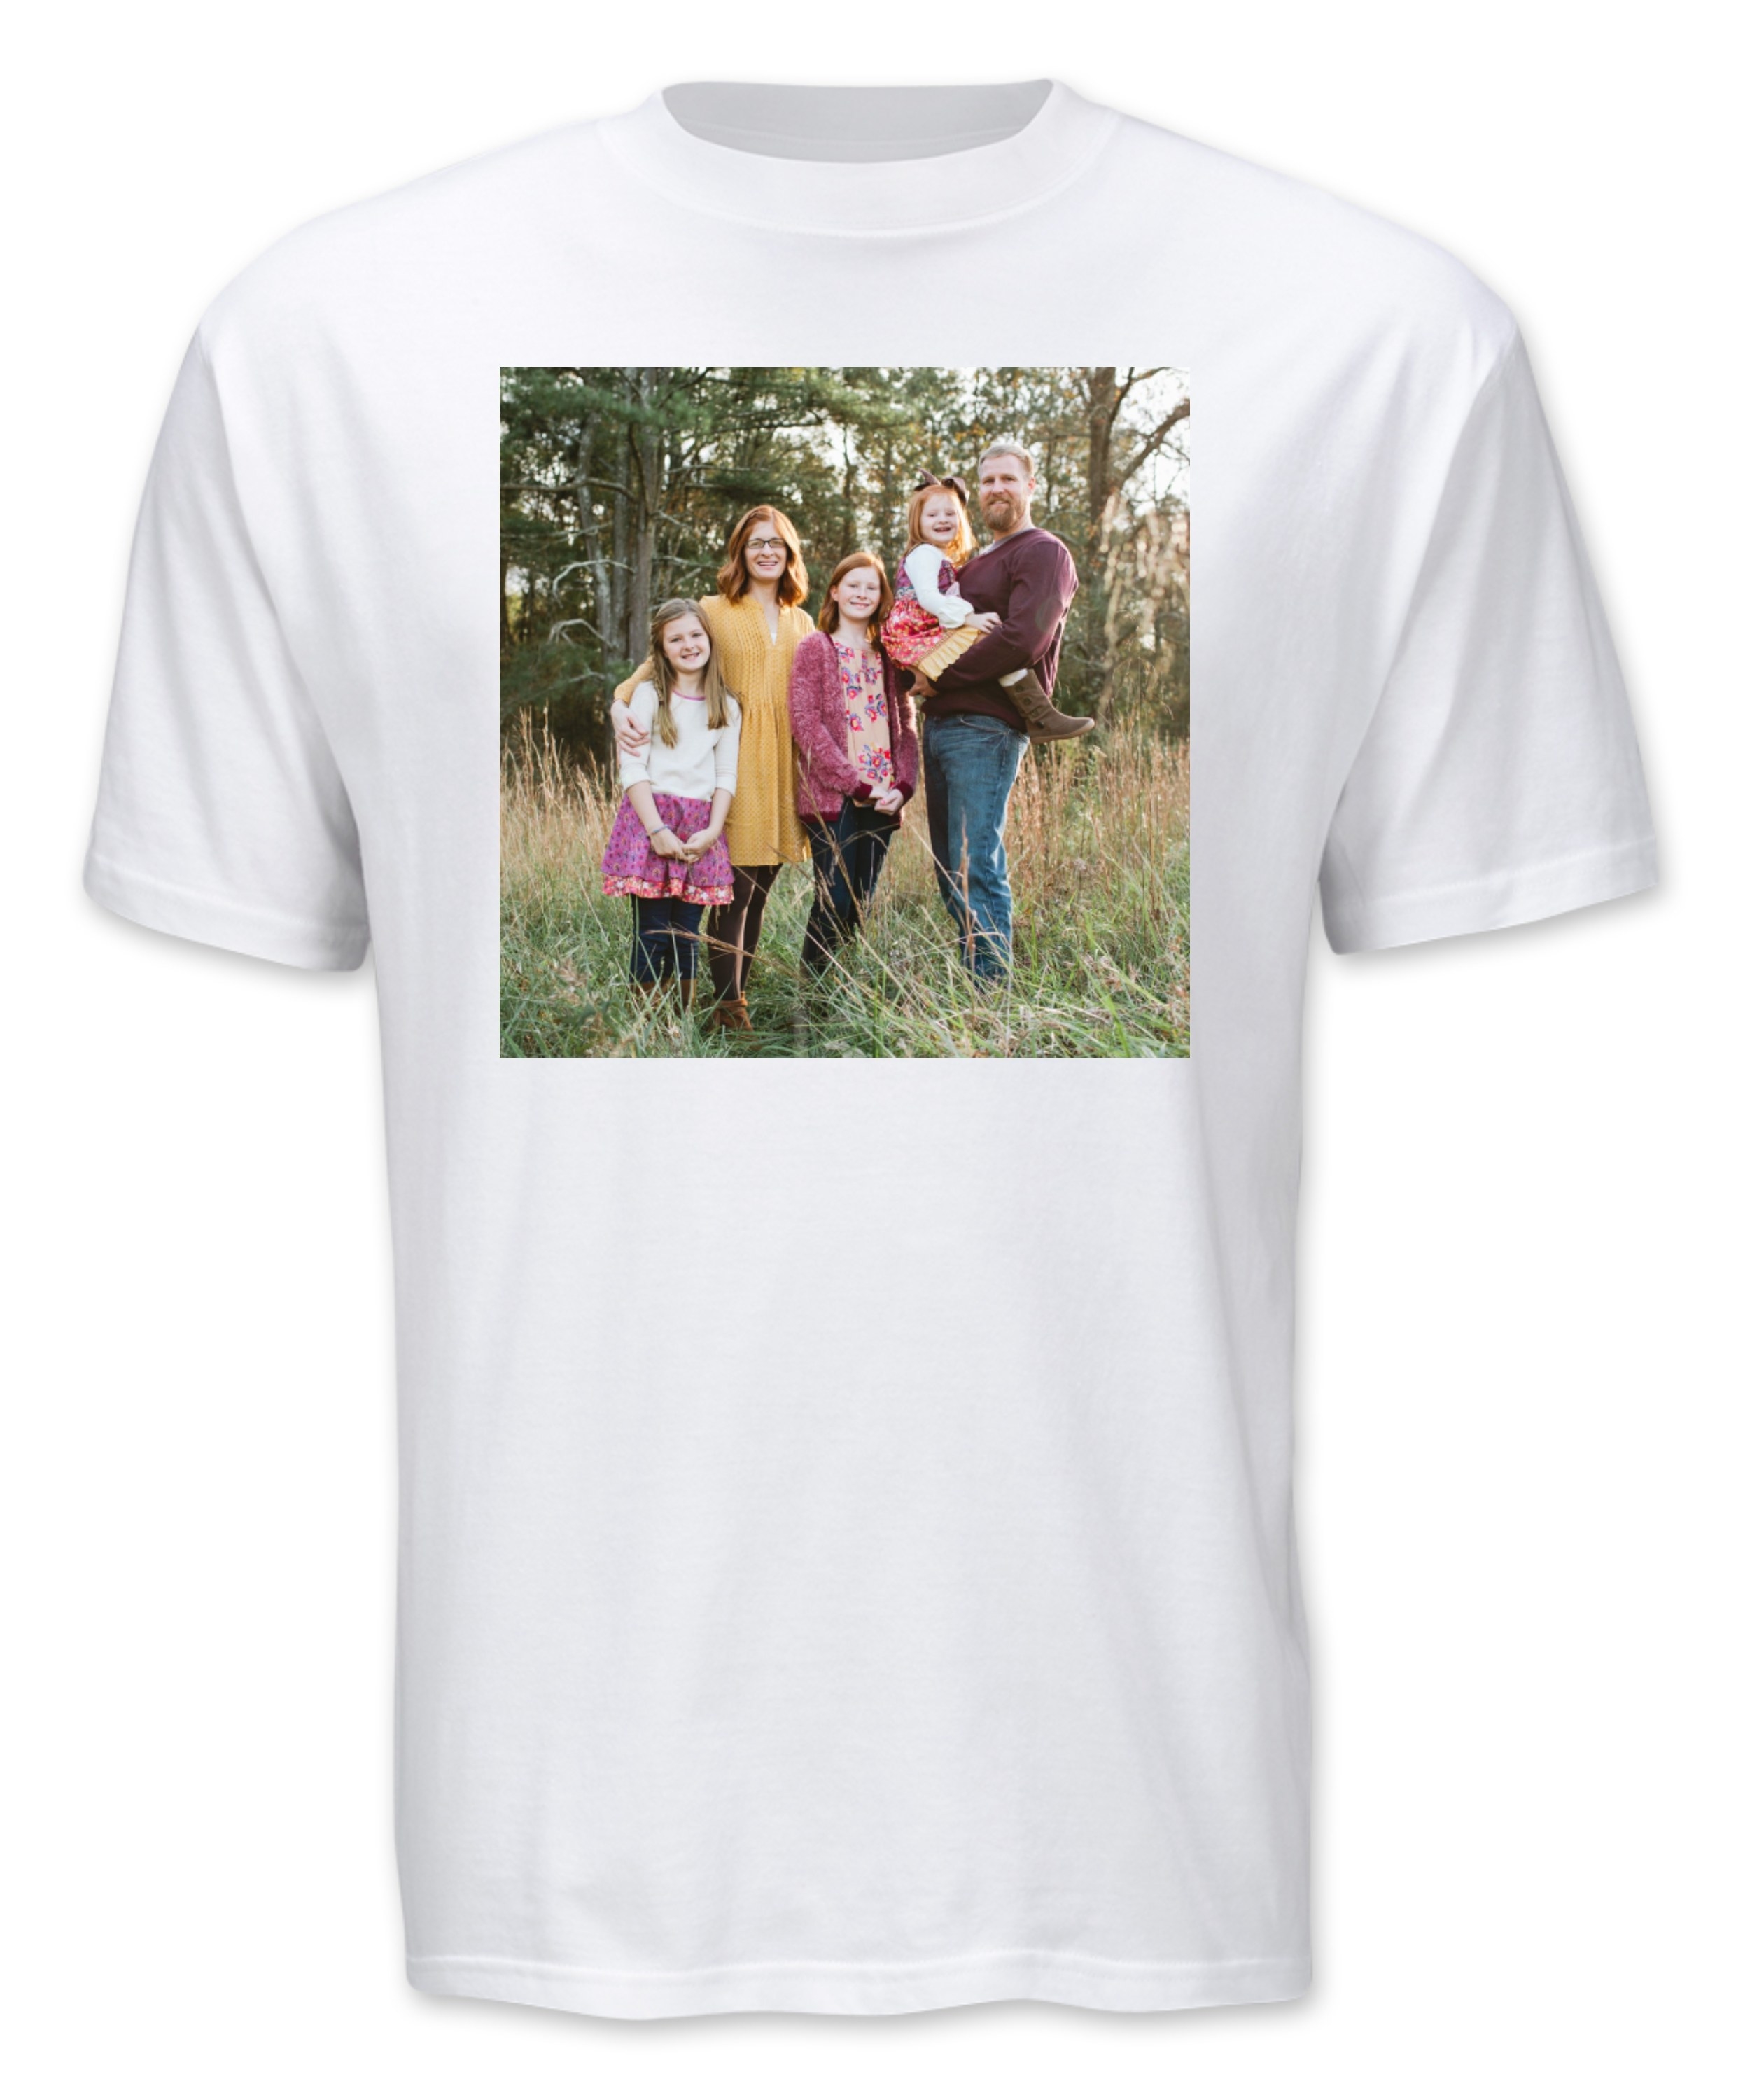 white t-shirt printed with a large photo on the chest